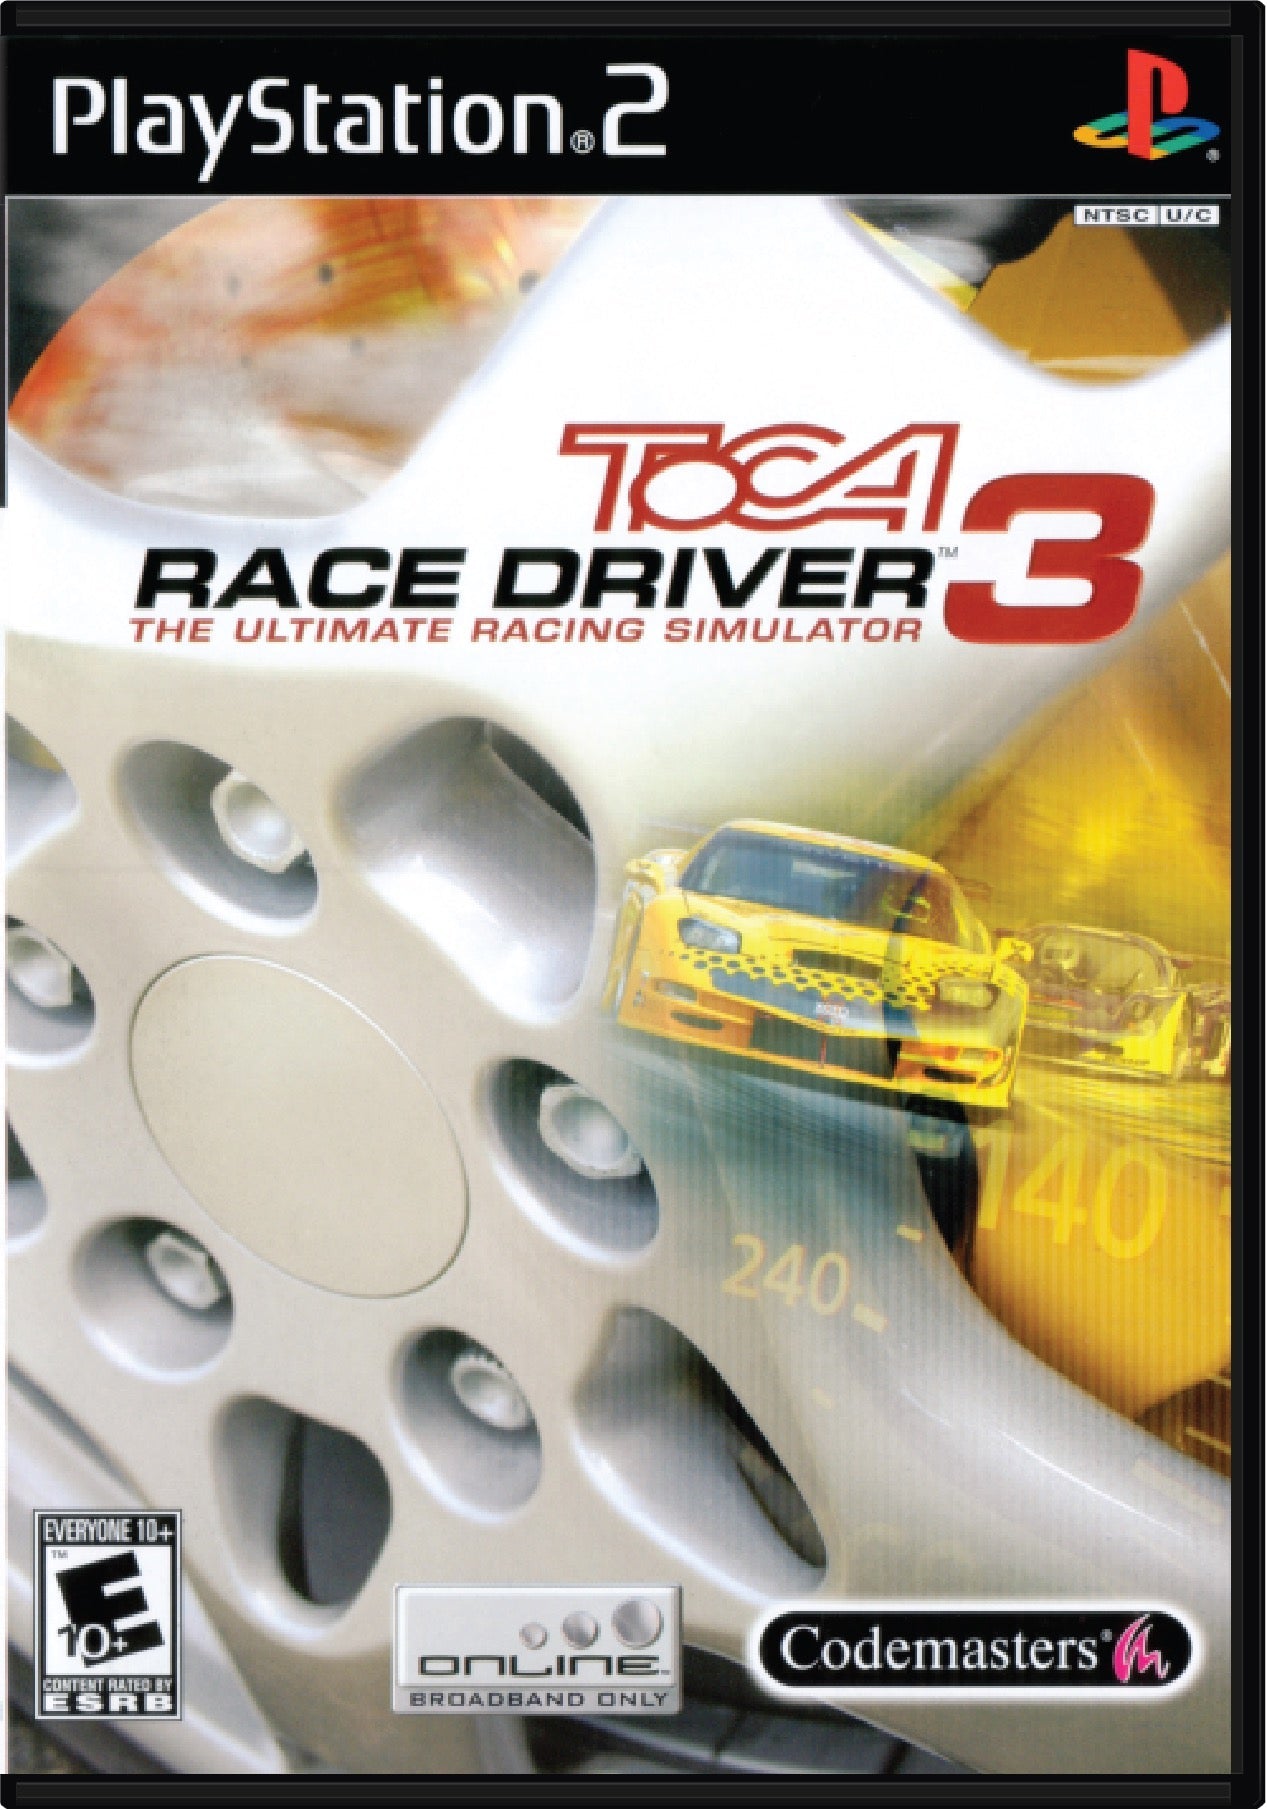 TOCA Race Driver 3 Cover Art and Product Photo